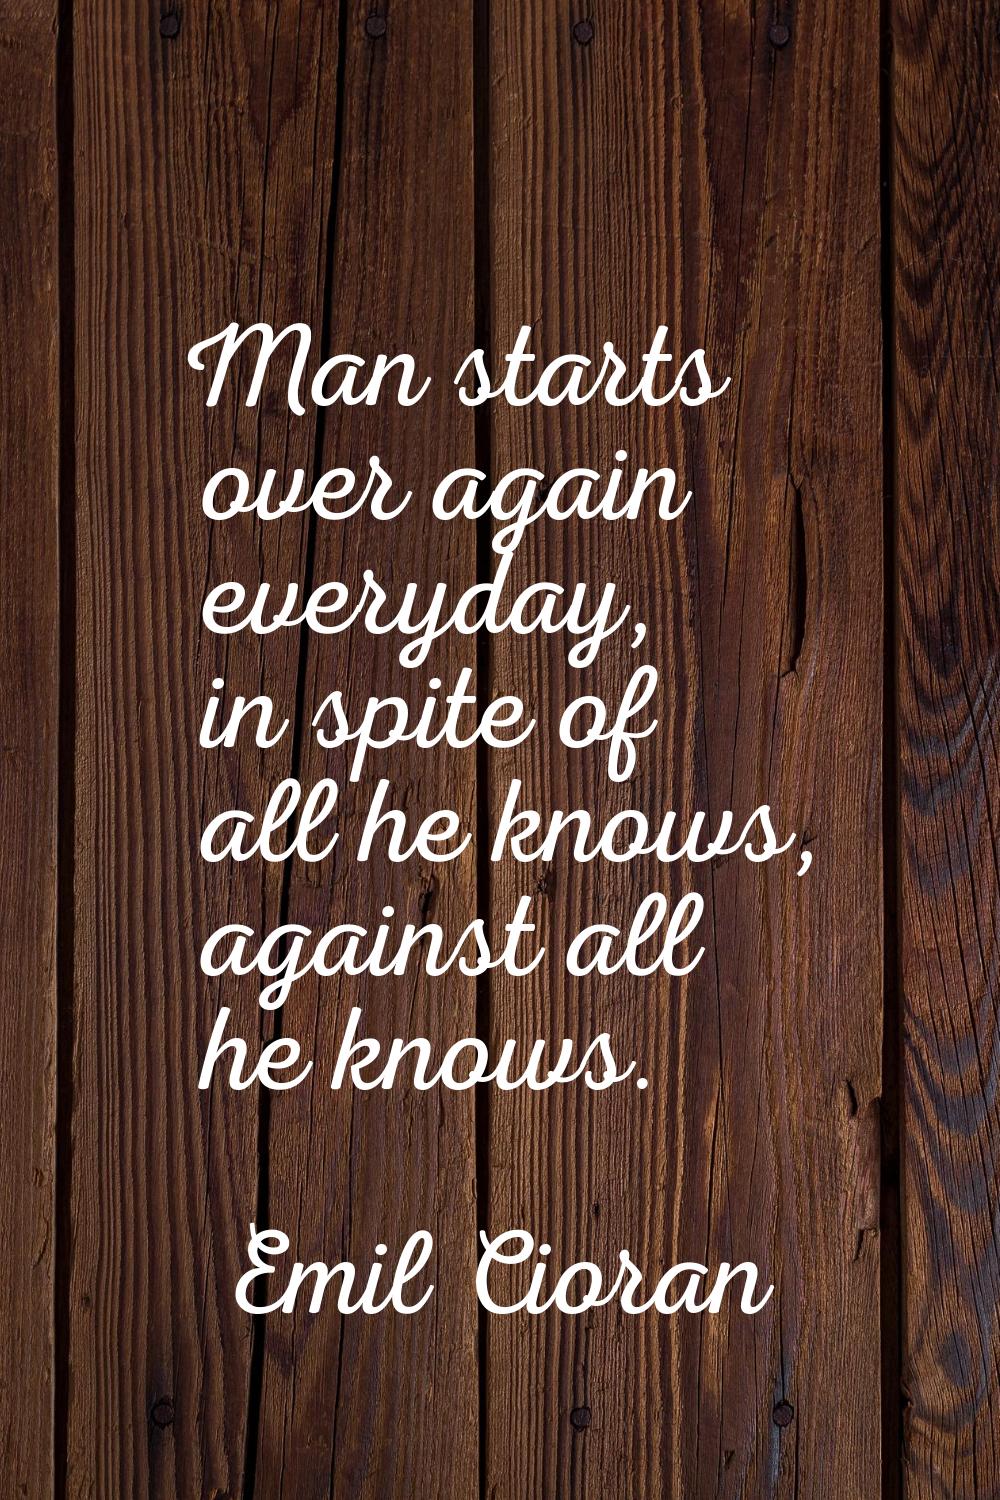 Man starts over again everyday, in spite of all he knows, against all he knows.